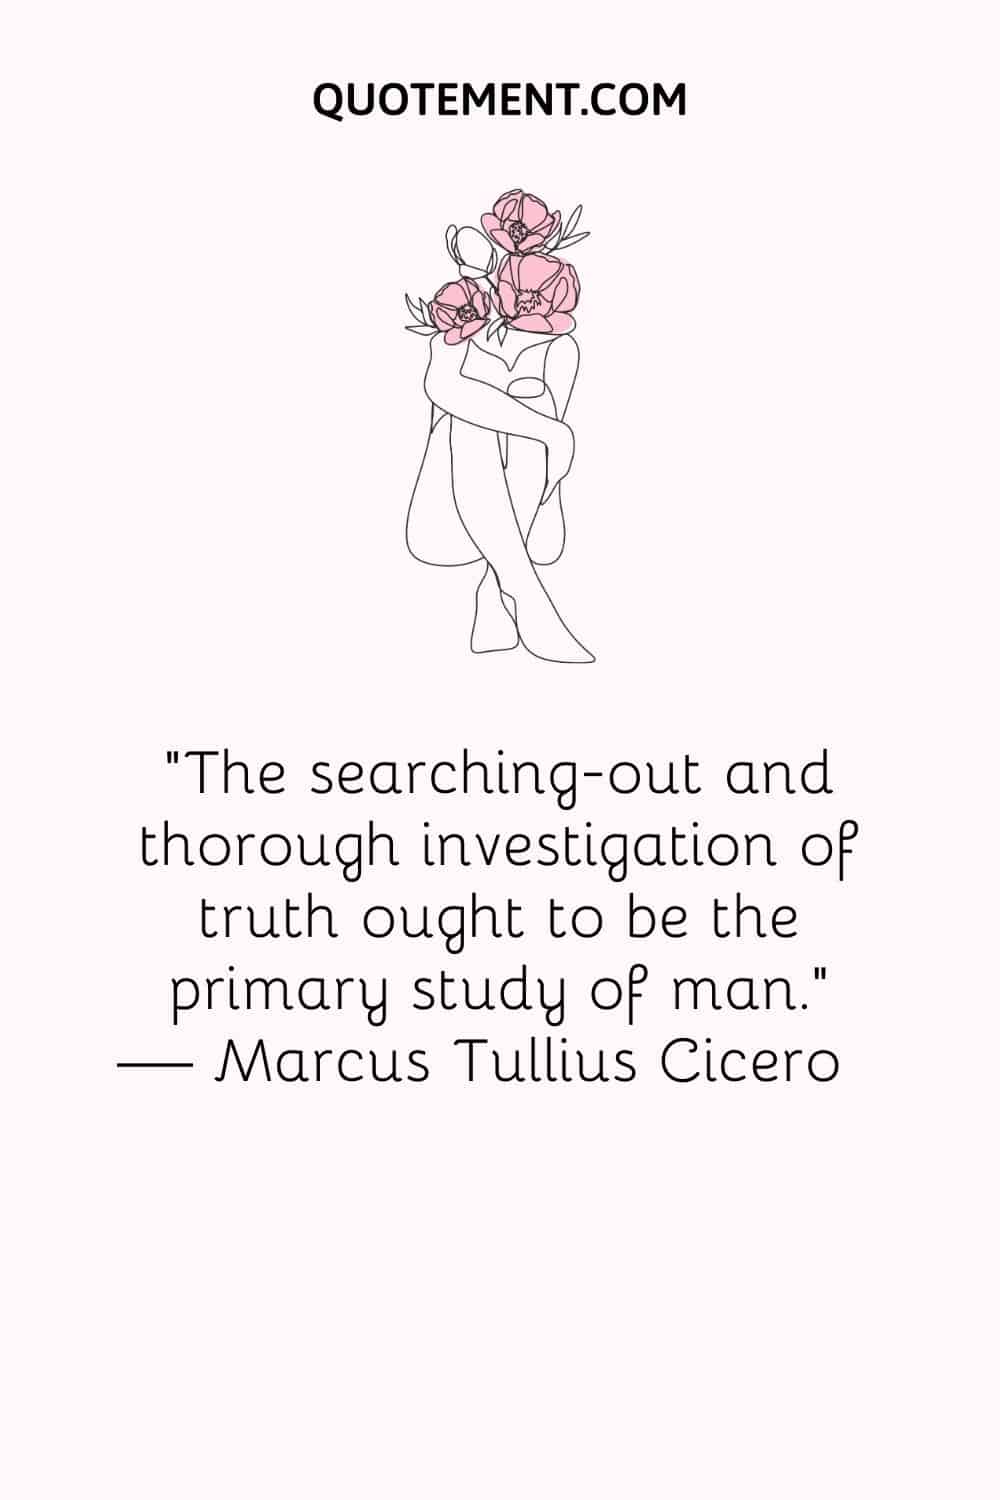 The searching-out and thorough investigation of truth ought to be the primary study of man